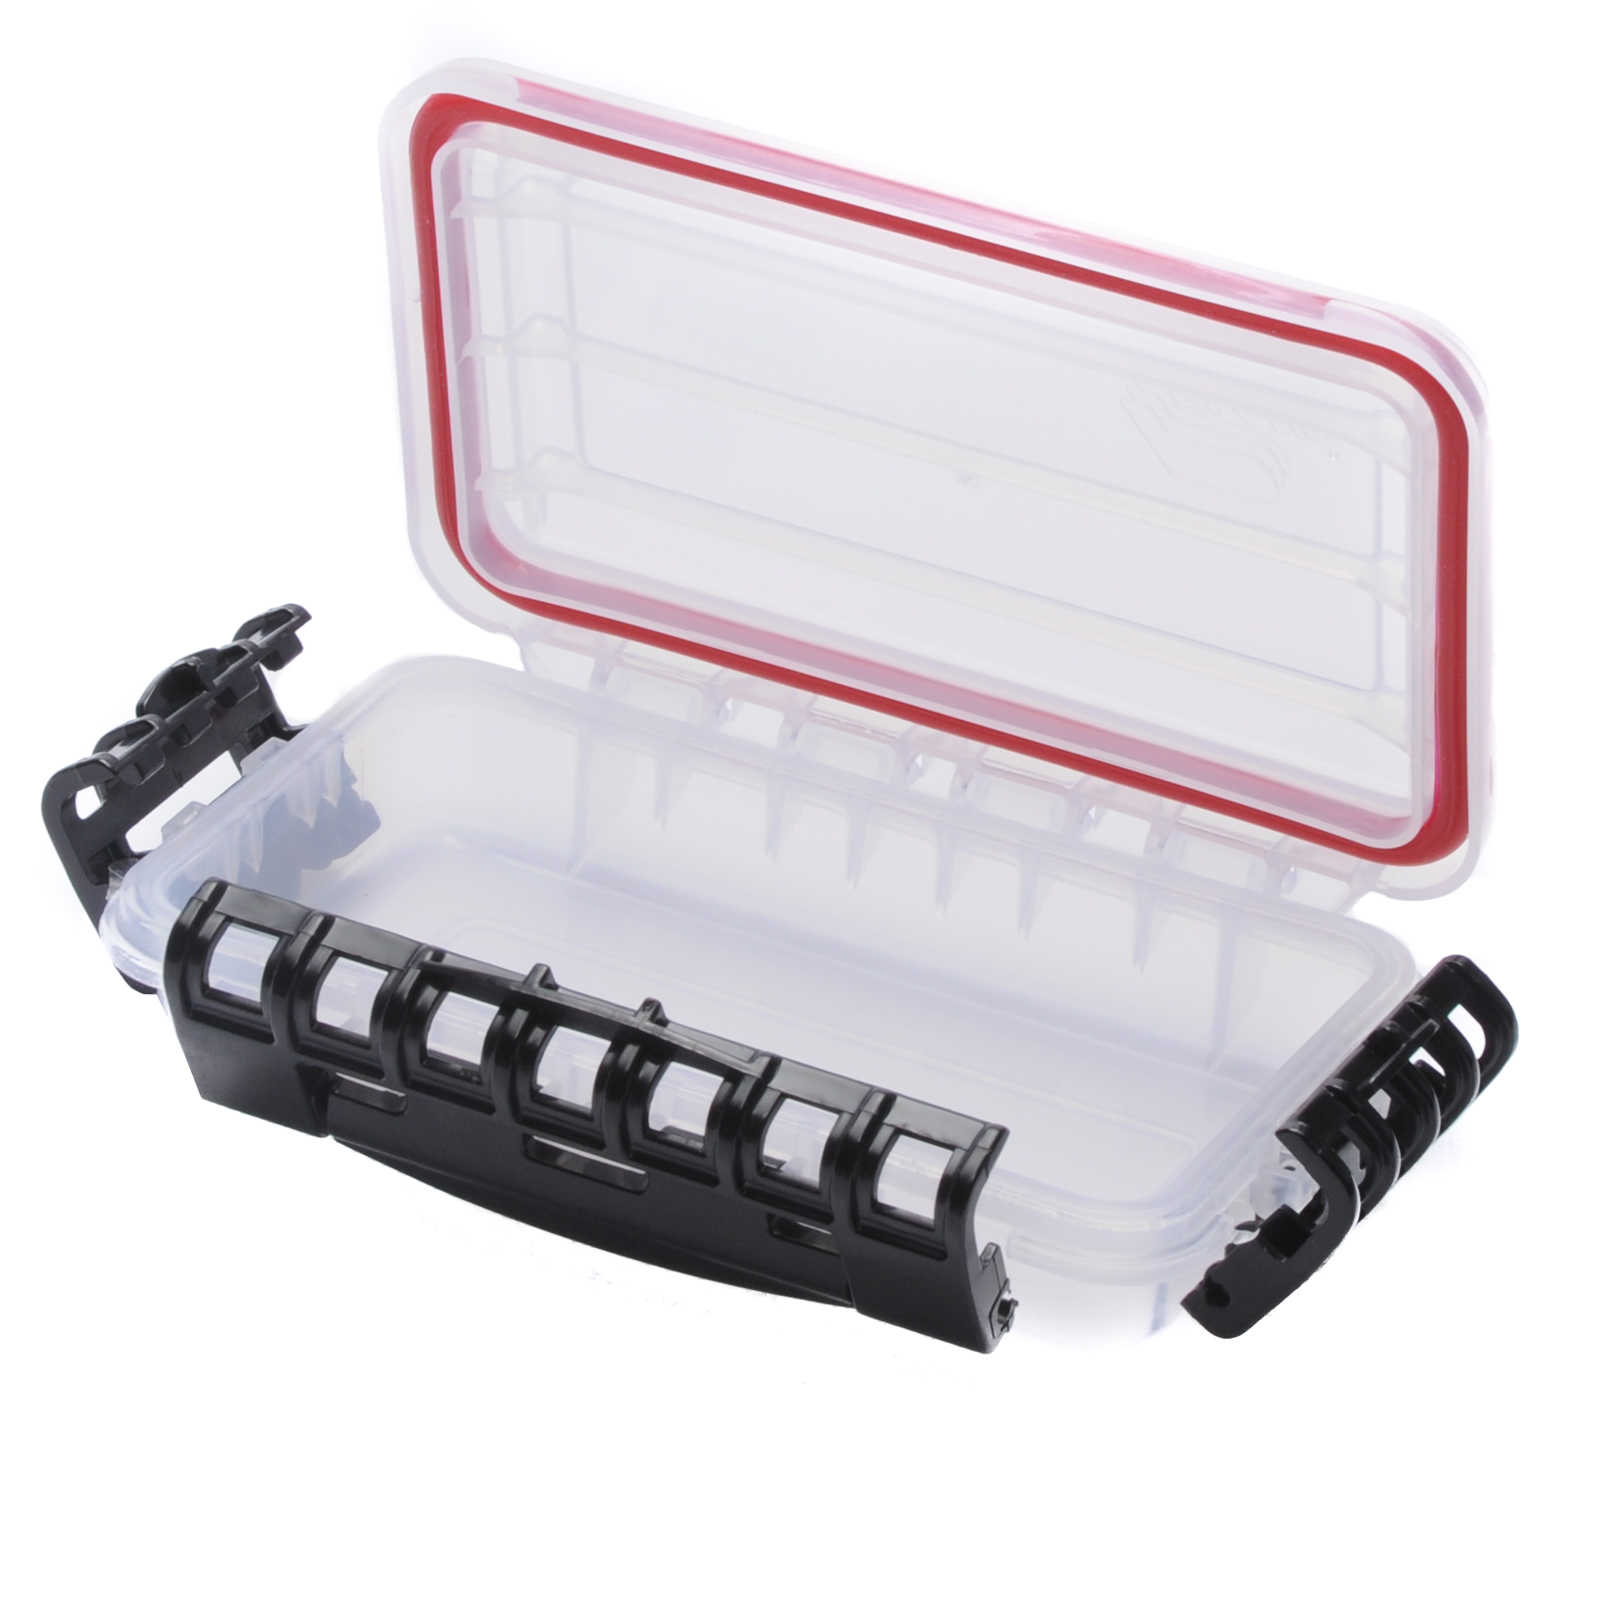 Safe Composite Material Shockproof Box Storage Box Waterproof Box Small